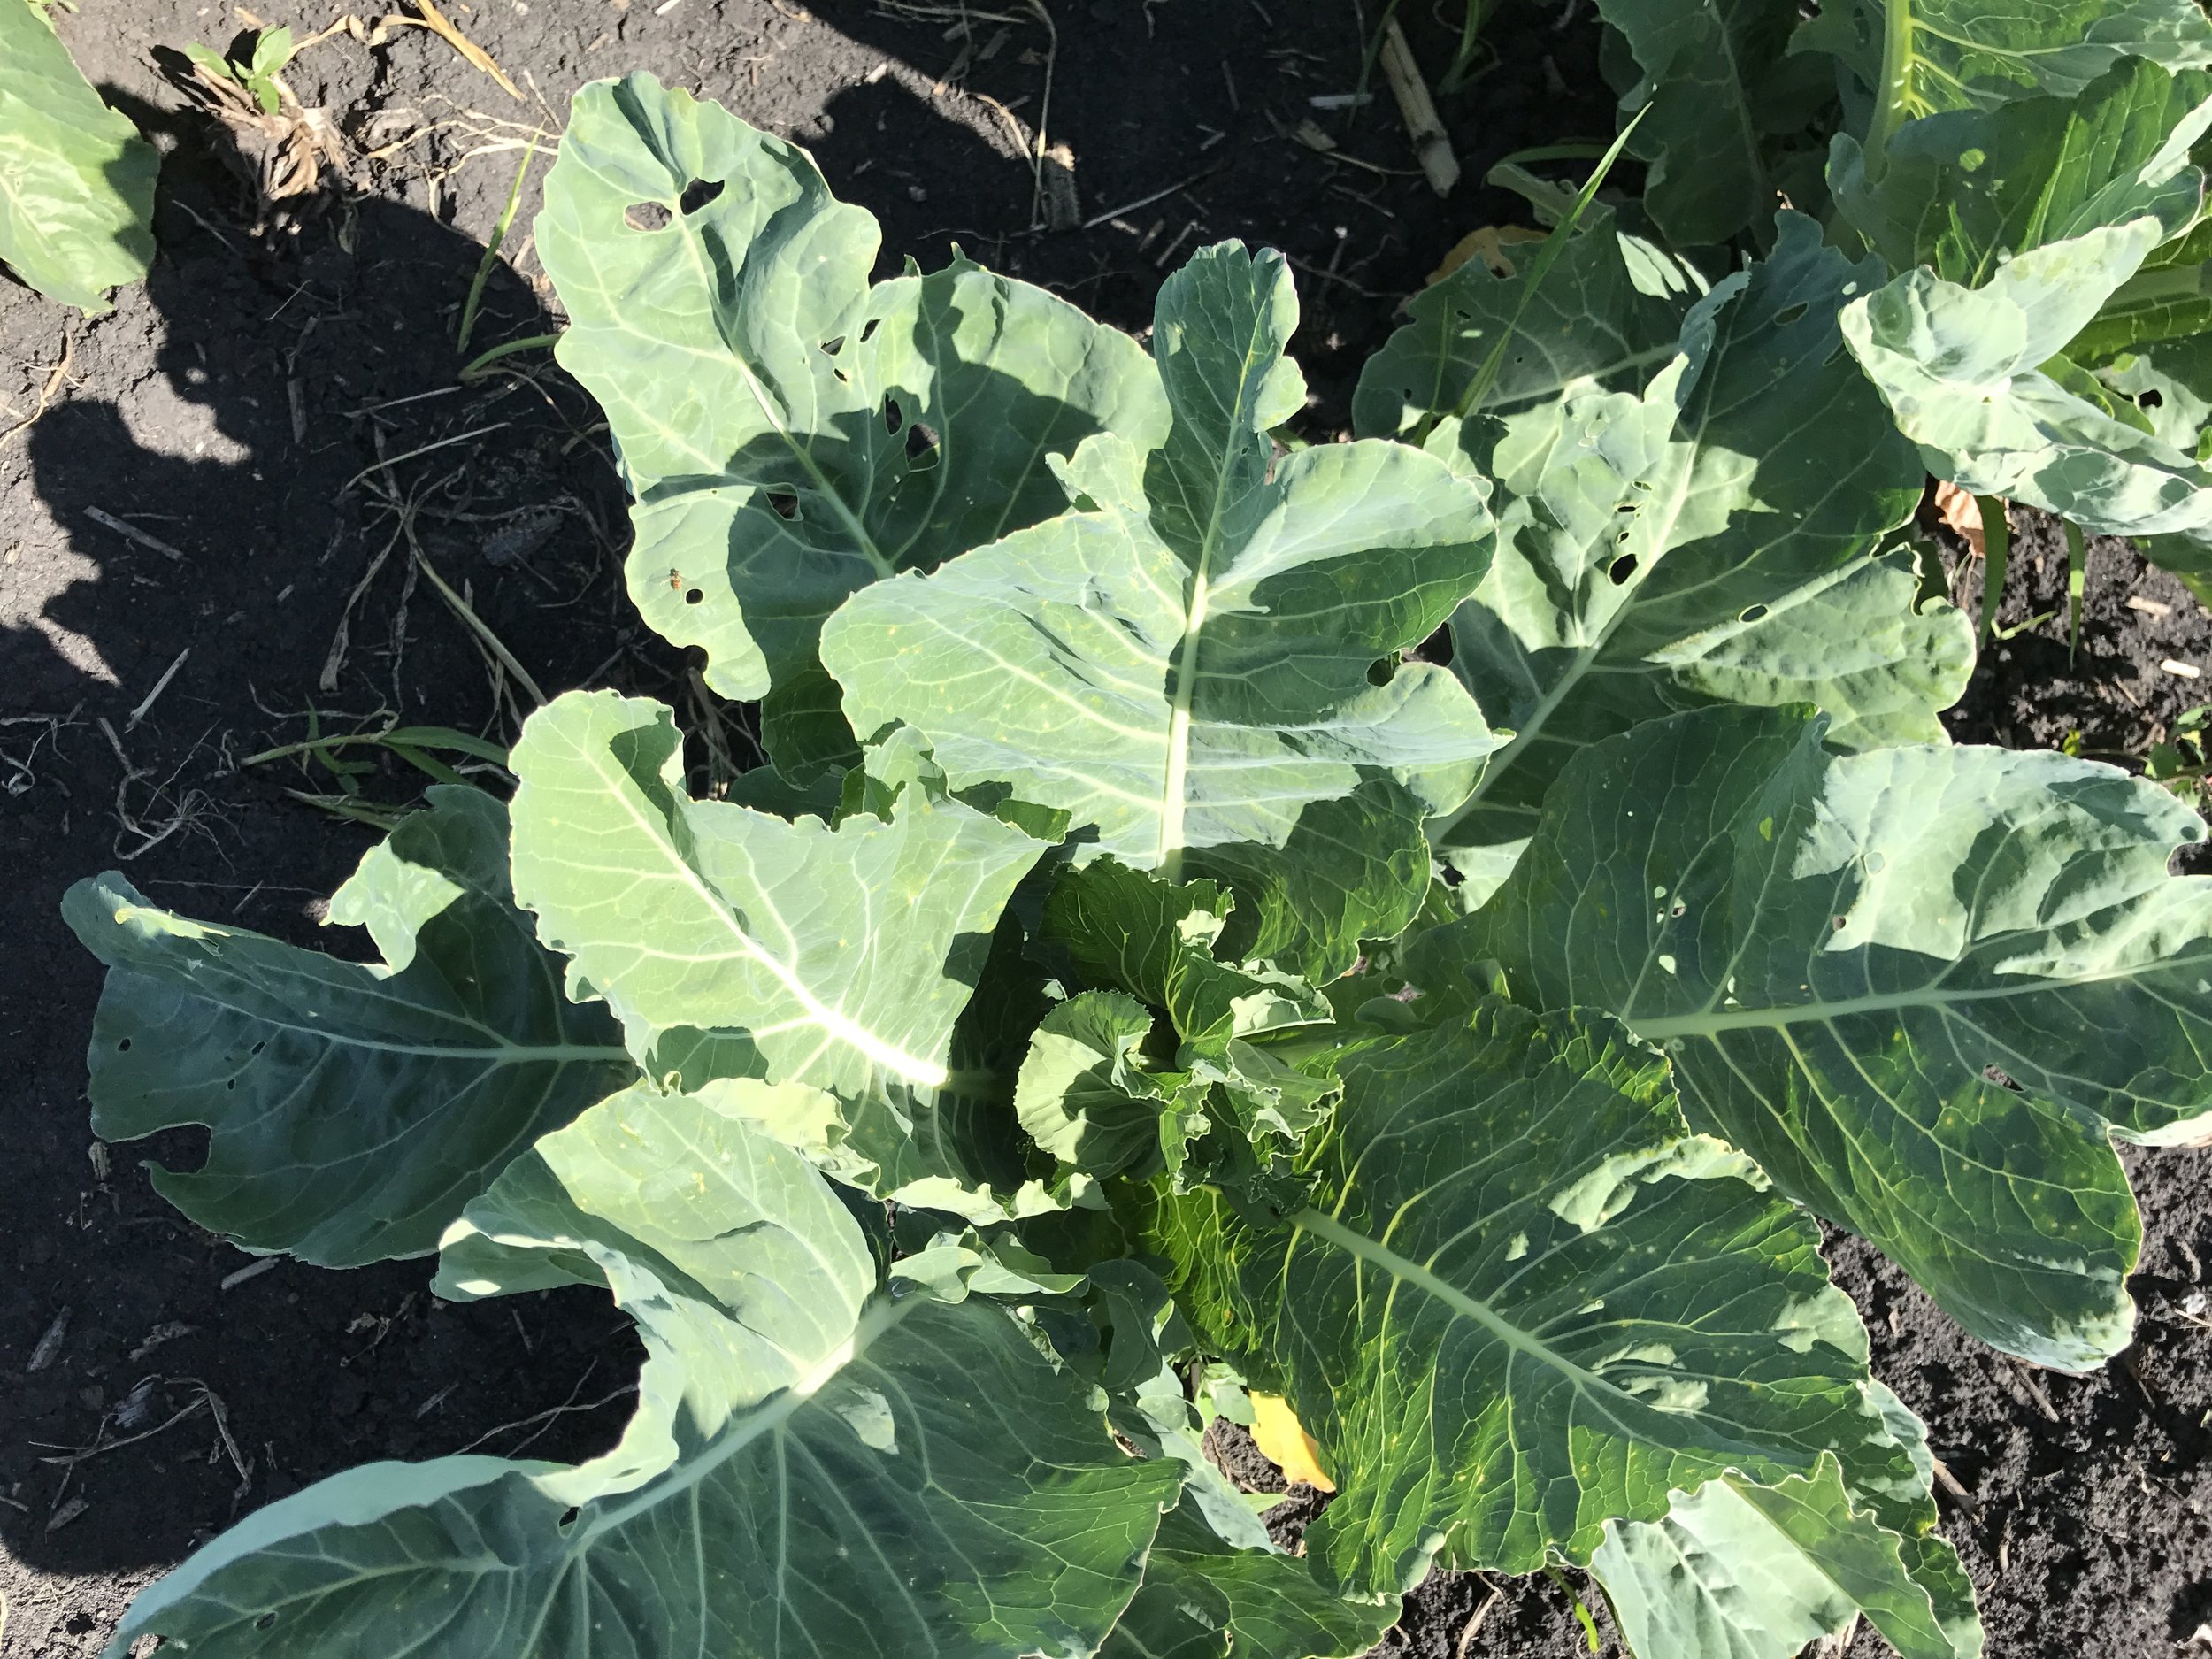  This is our cauliflower plant. The leaves are already curling in and around where the cauliflower head will form. 